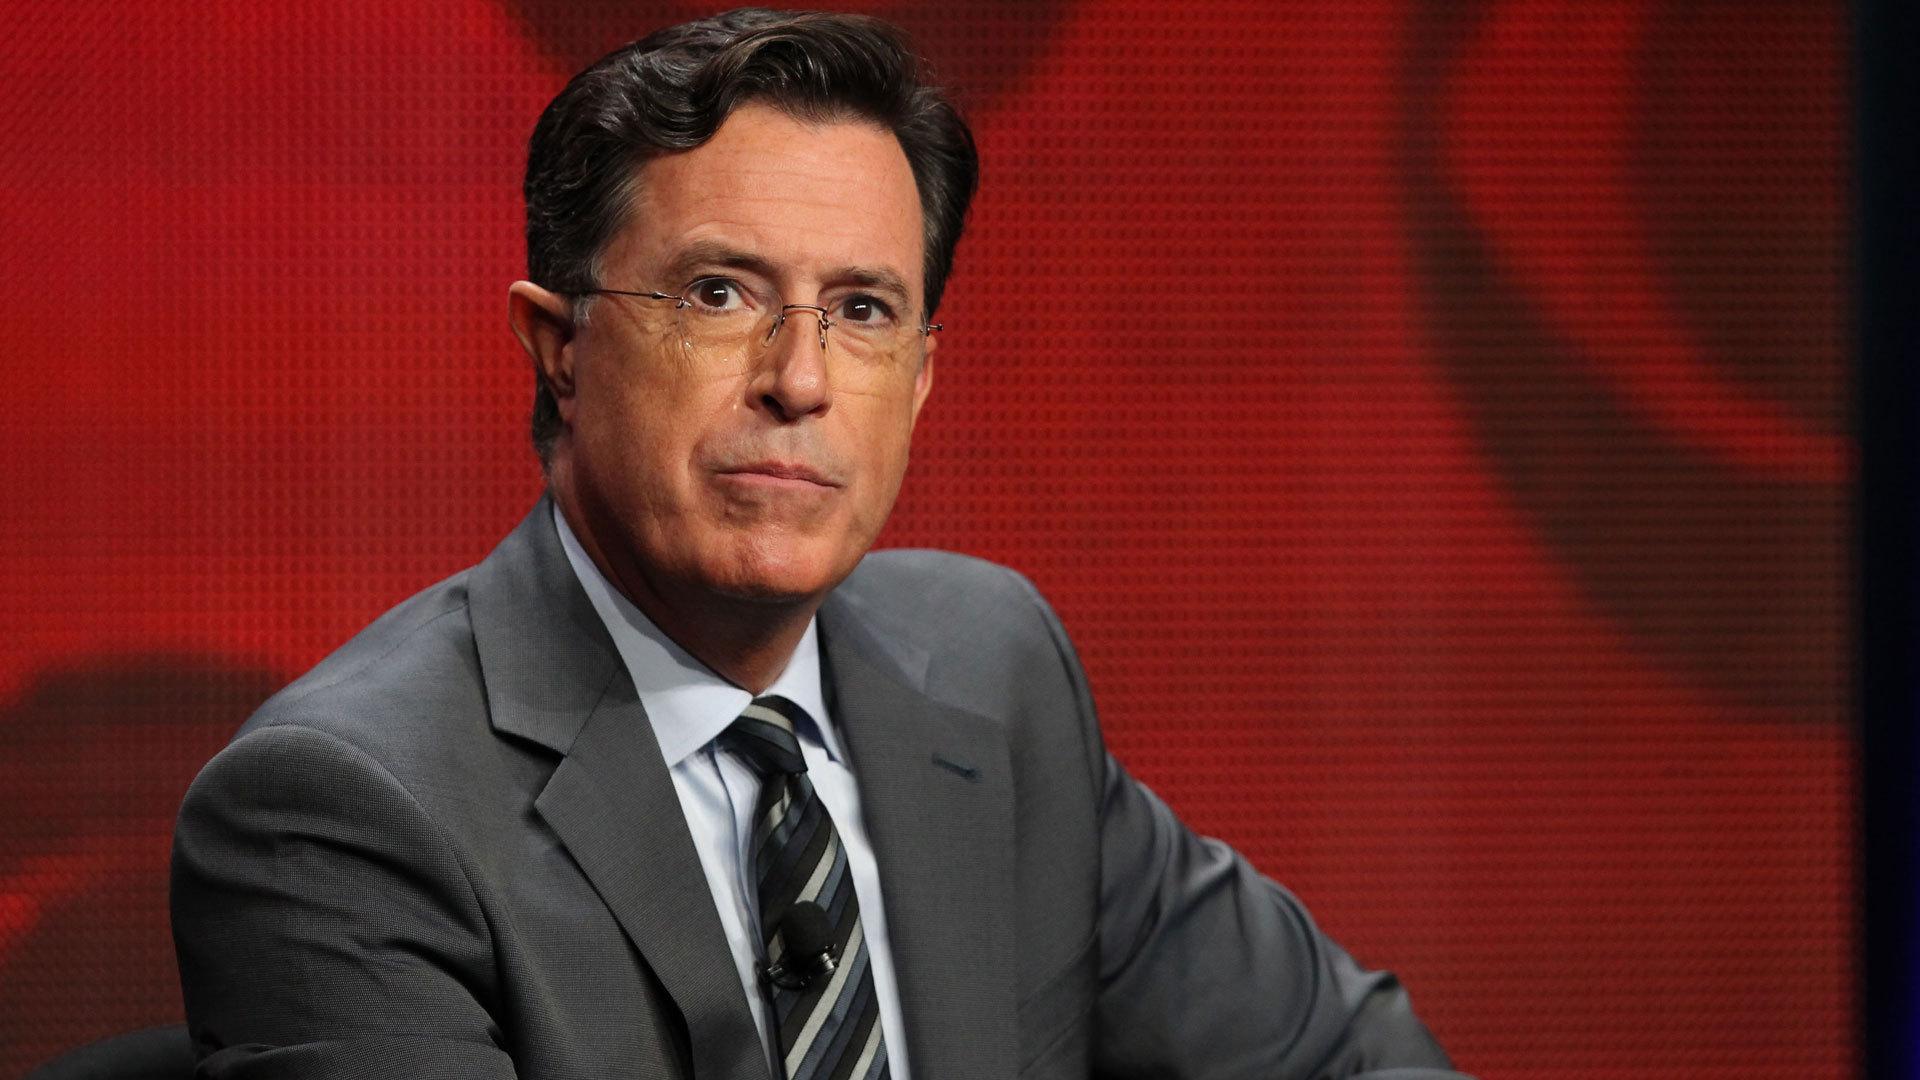 Stephen Colbert Wallpaper Image Photo Picture Background